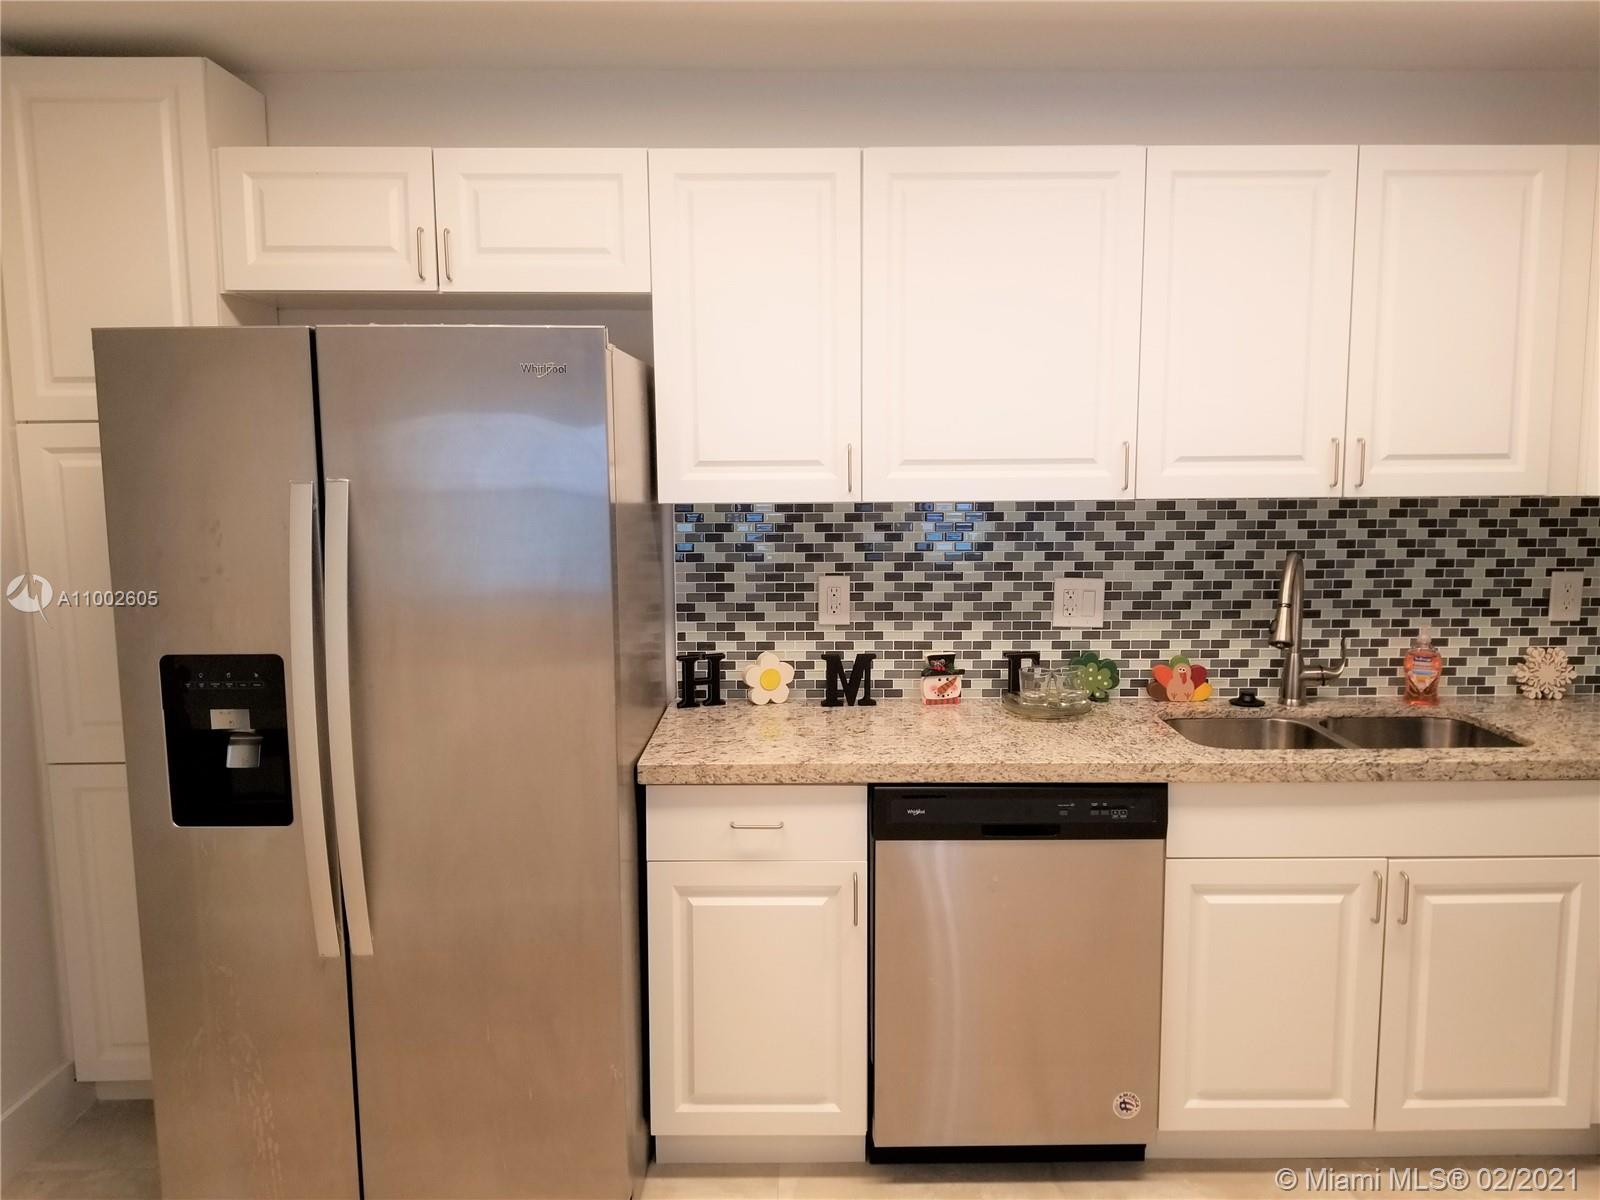 a kitchen with stainless steel appliances granite countertop white cabinets and refrigerator